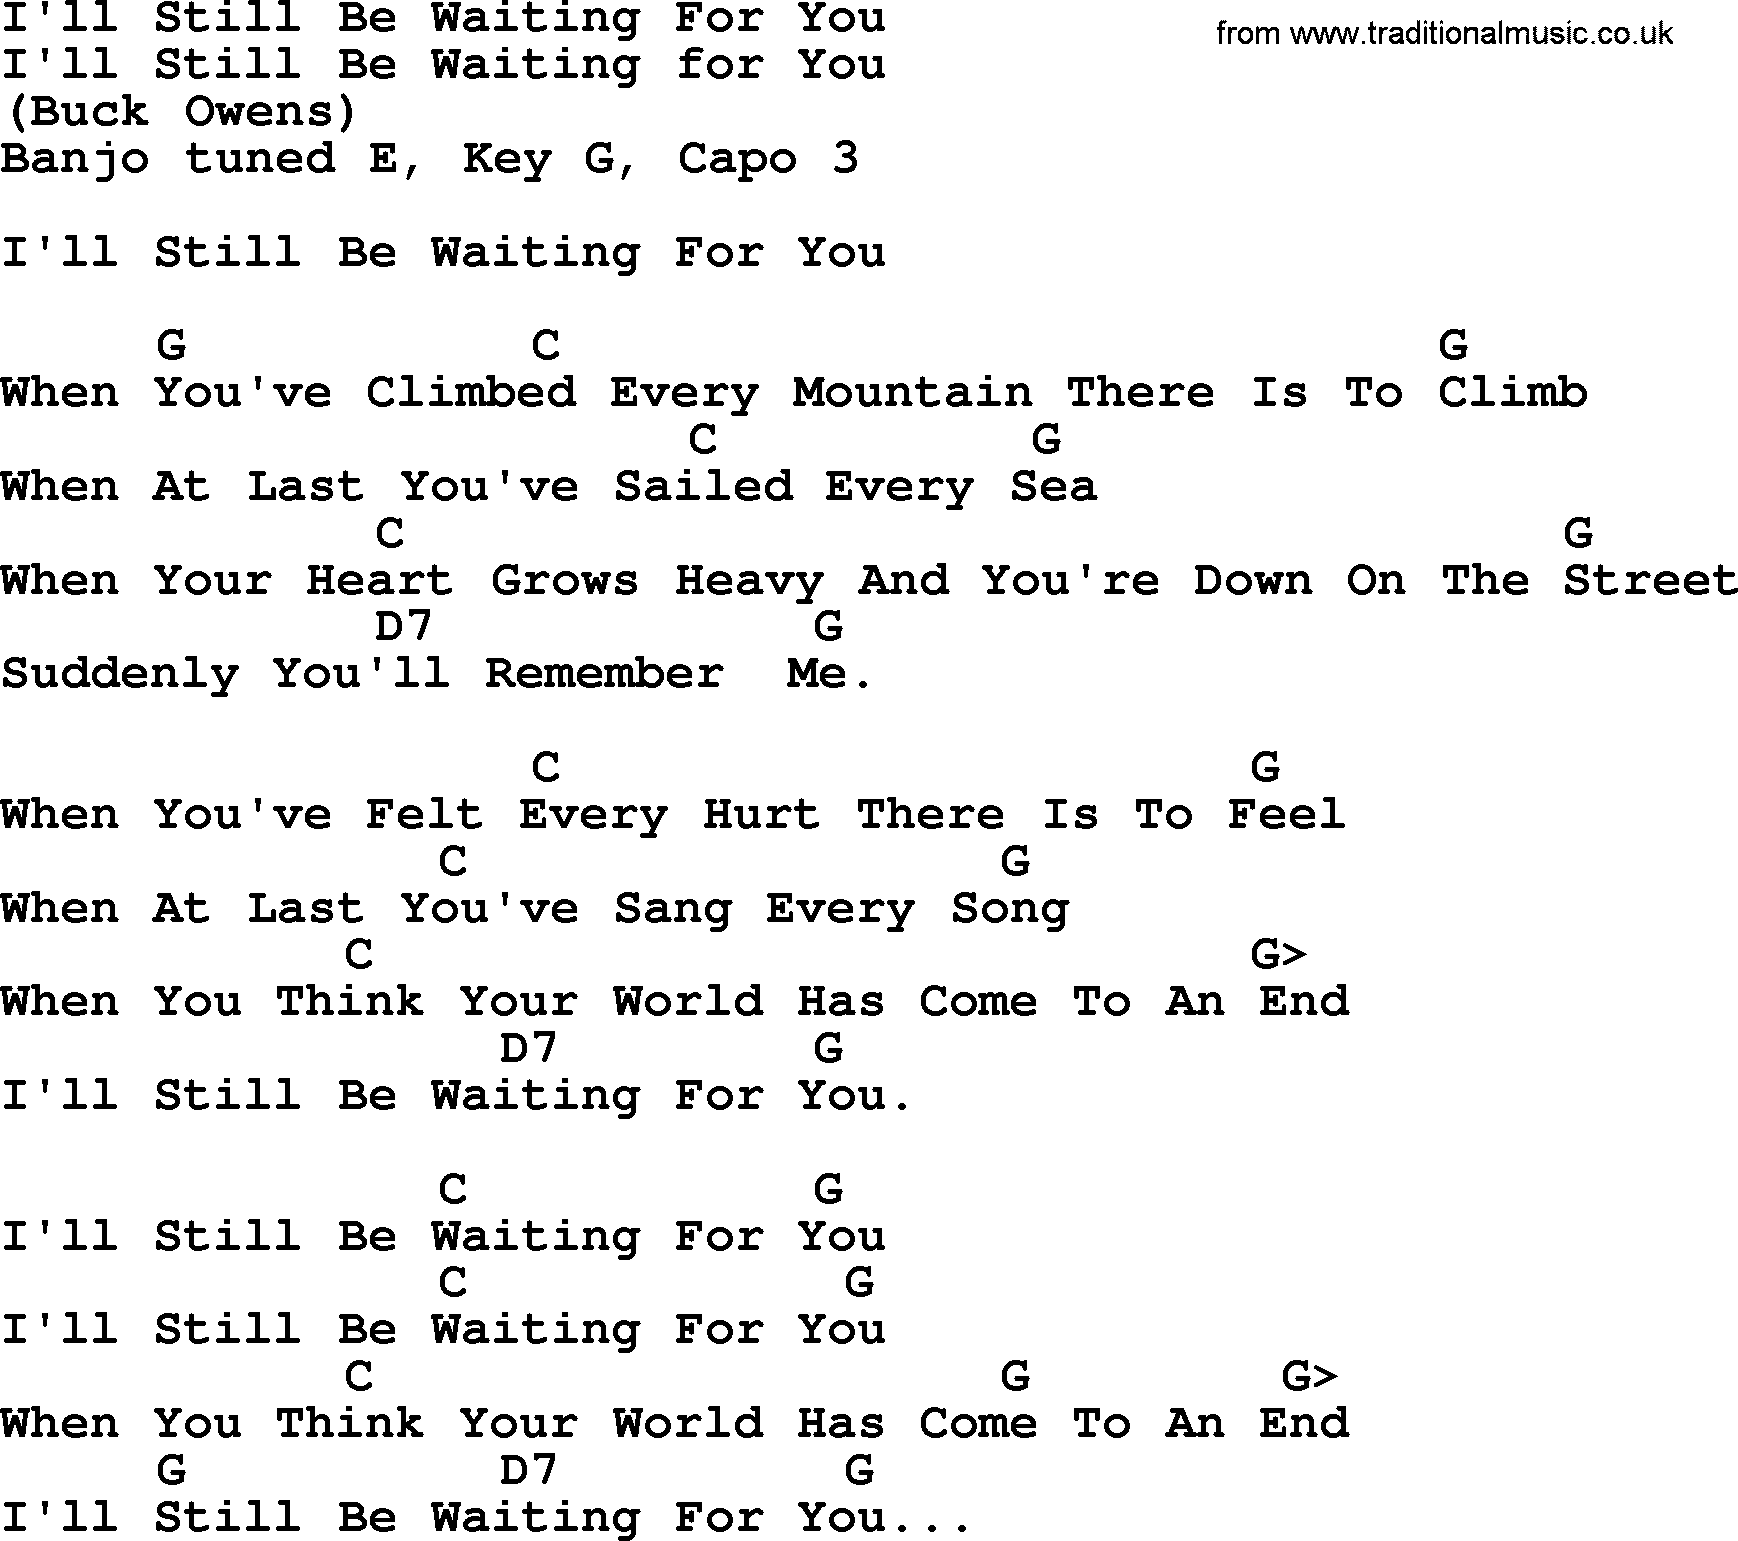 I'll Still Be Waiting For You - Bluegrass lyrics with chords